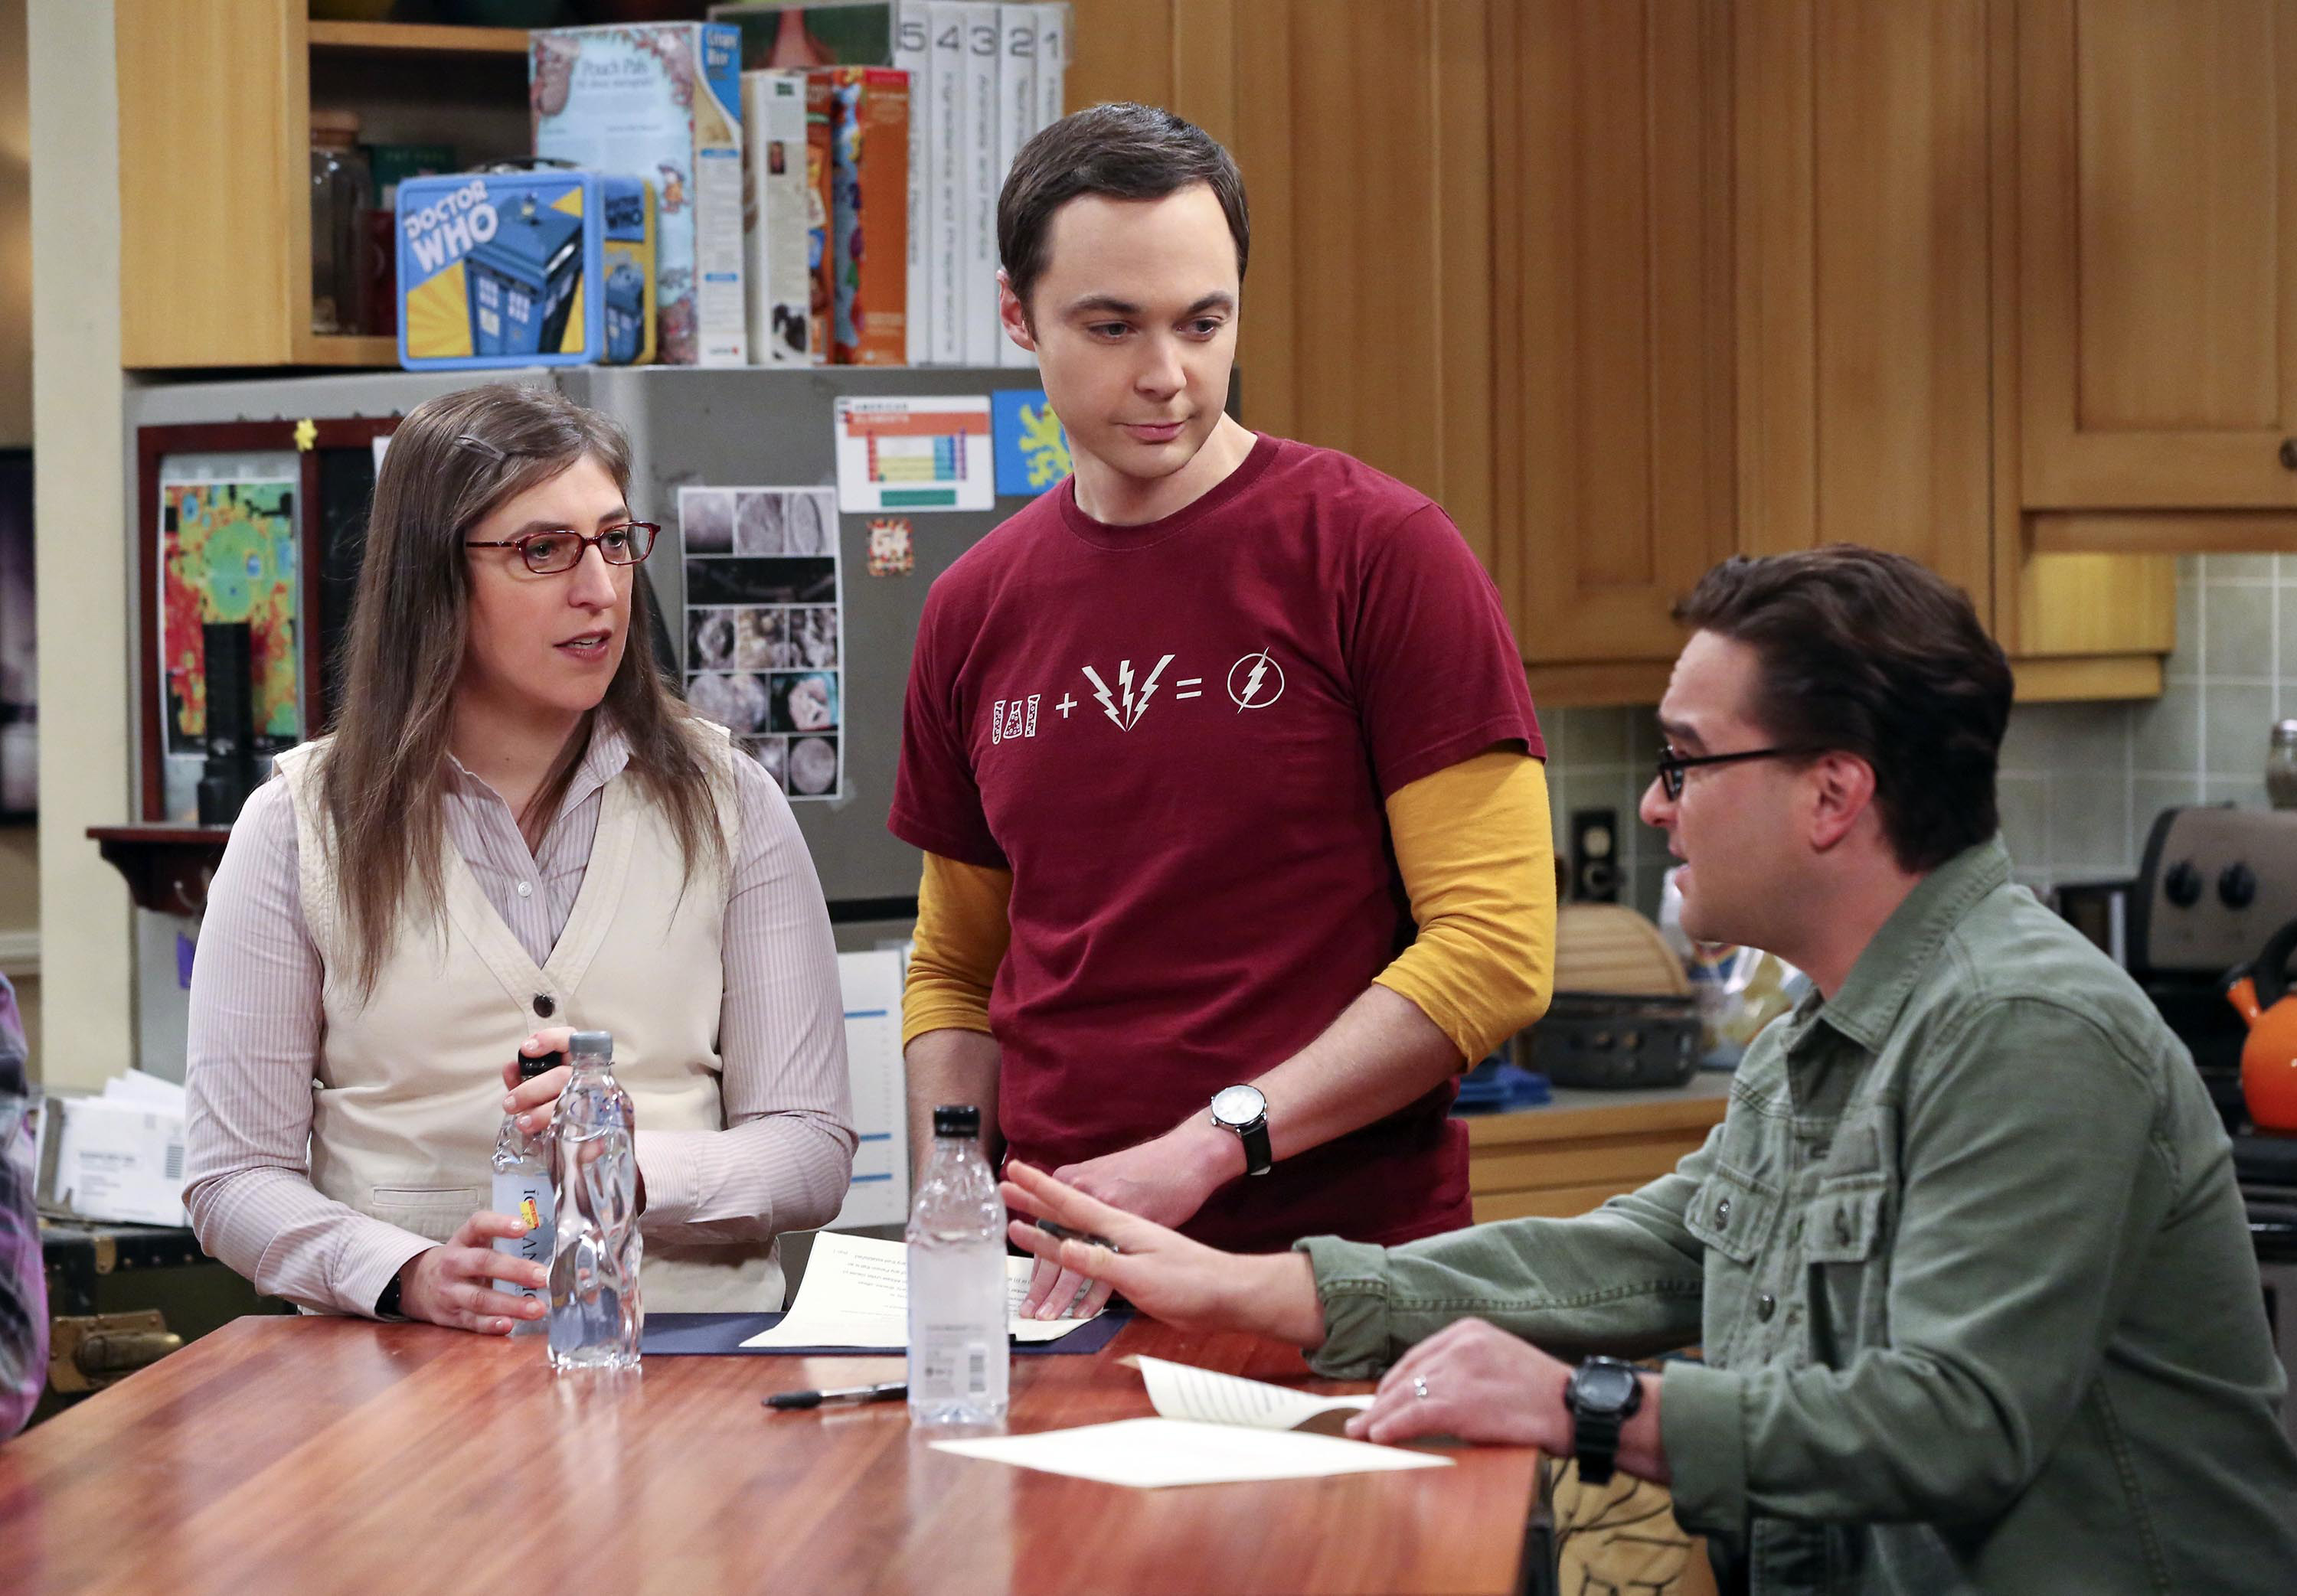 Jim standing with Mayim Bialik and Johnny Galecki during a scene in the kitchen